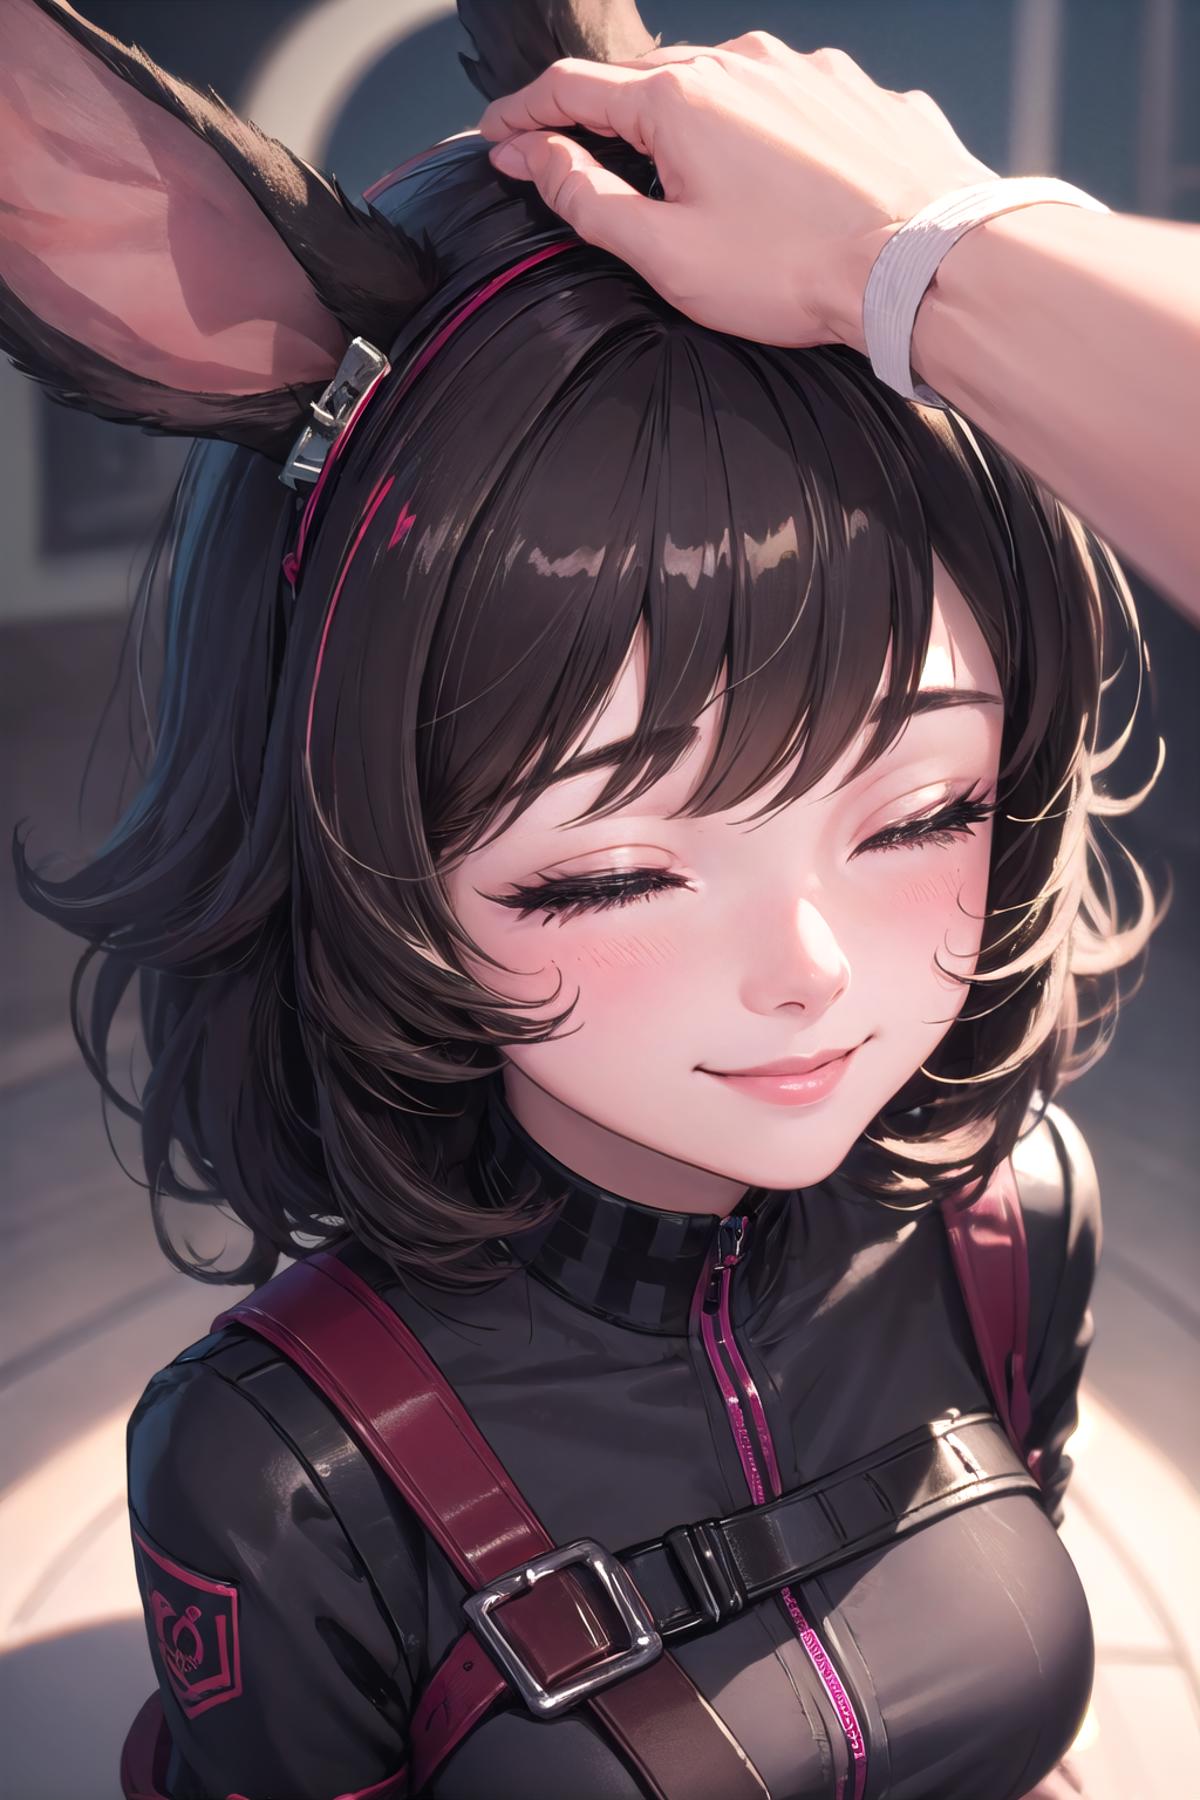 Headpat POV | Concept LoRA image by wrench1815